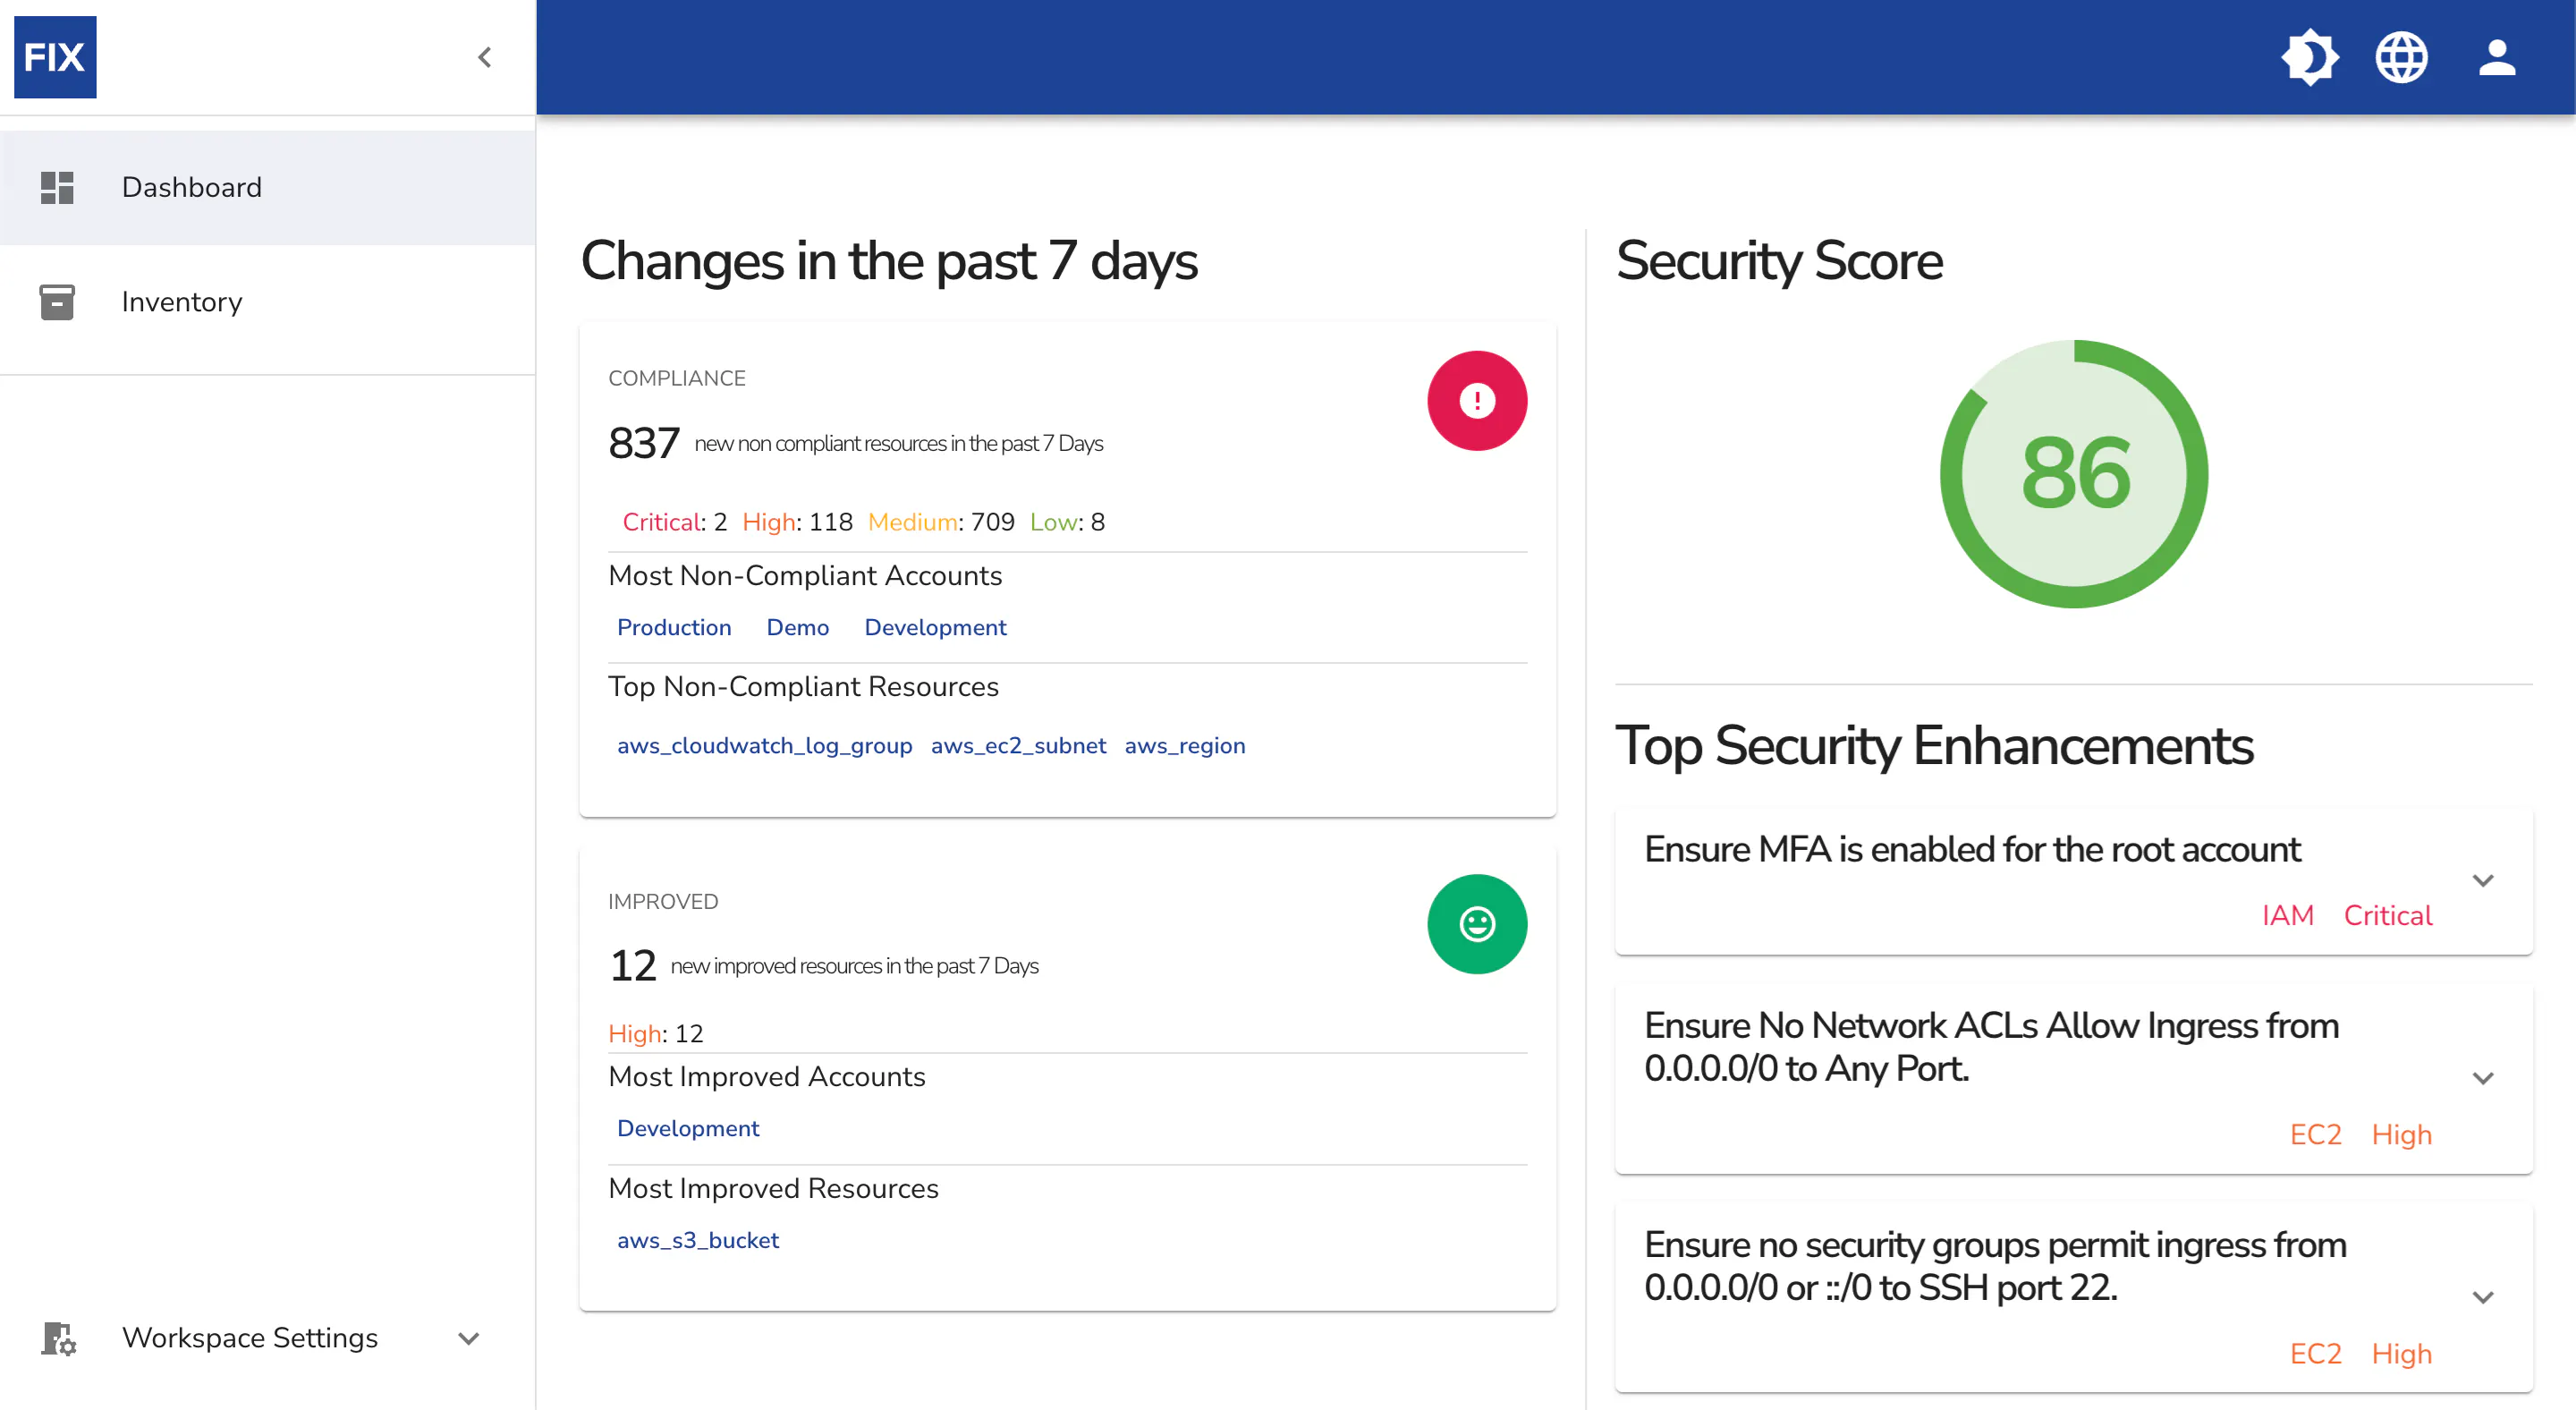 Fix's preconfigured security dashboard listing security risks and improvements